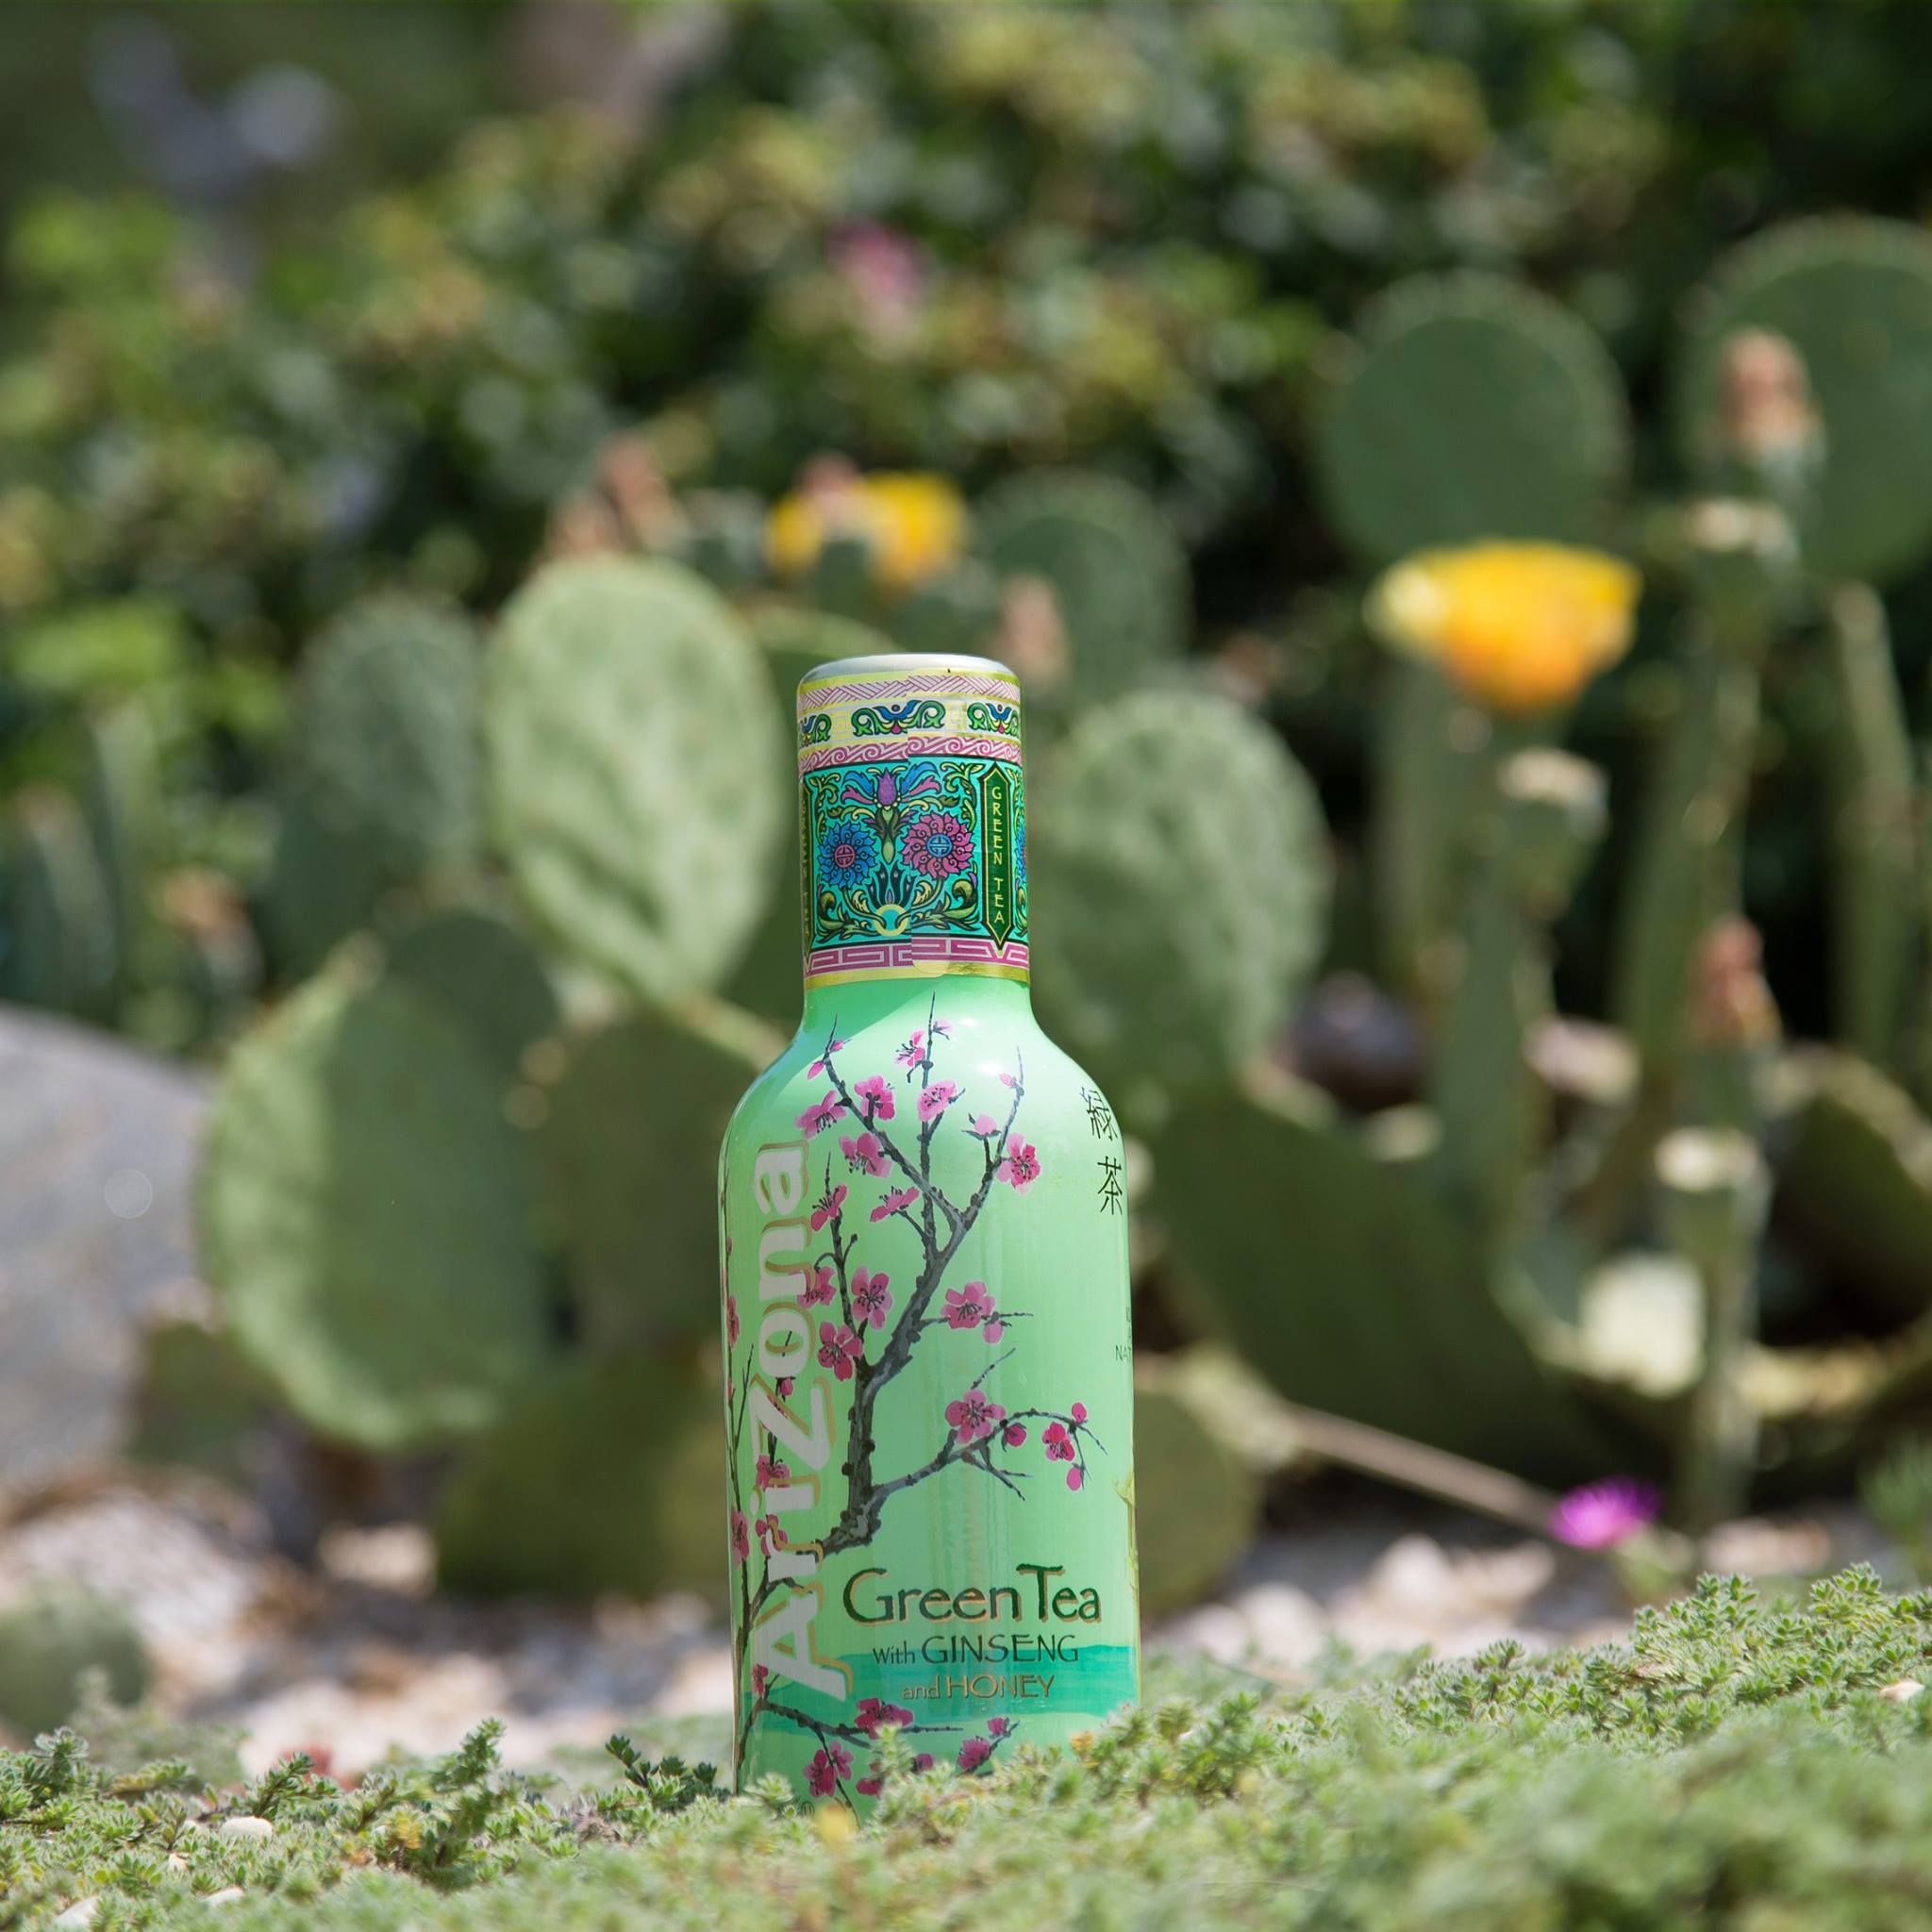 Arizona Ice Tea Is Being Sued After Falsely Labeling Its Green Tea With The Ingredient Ginseng